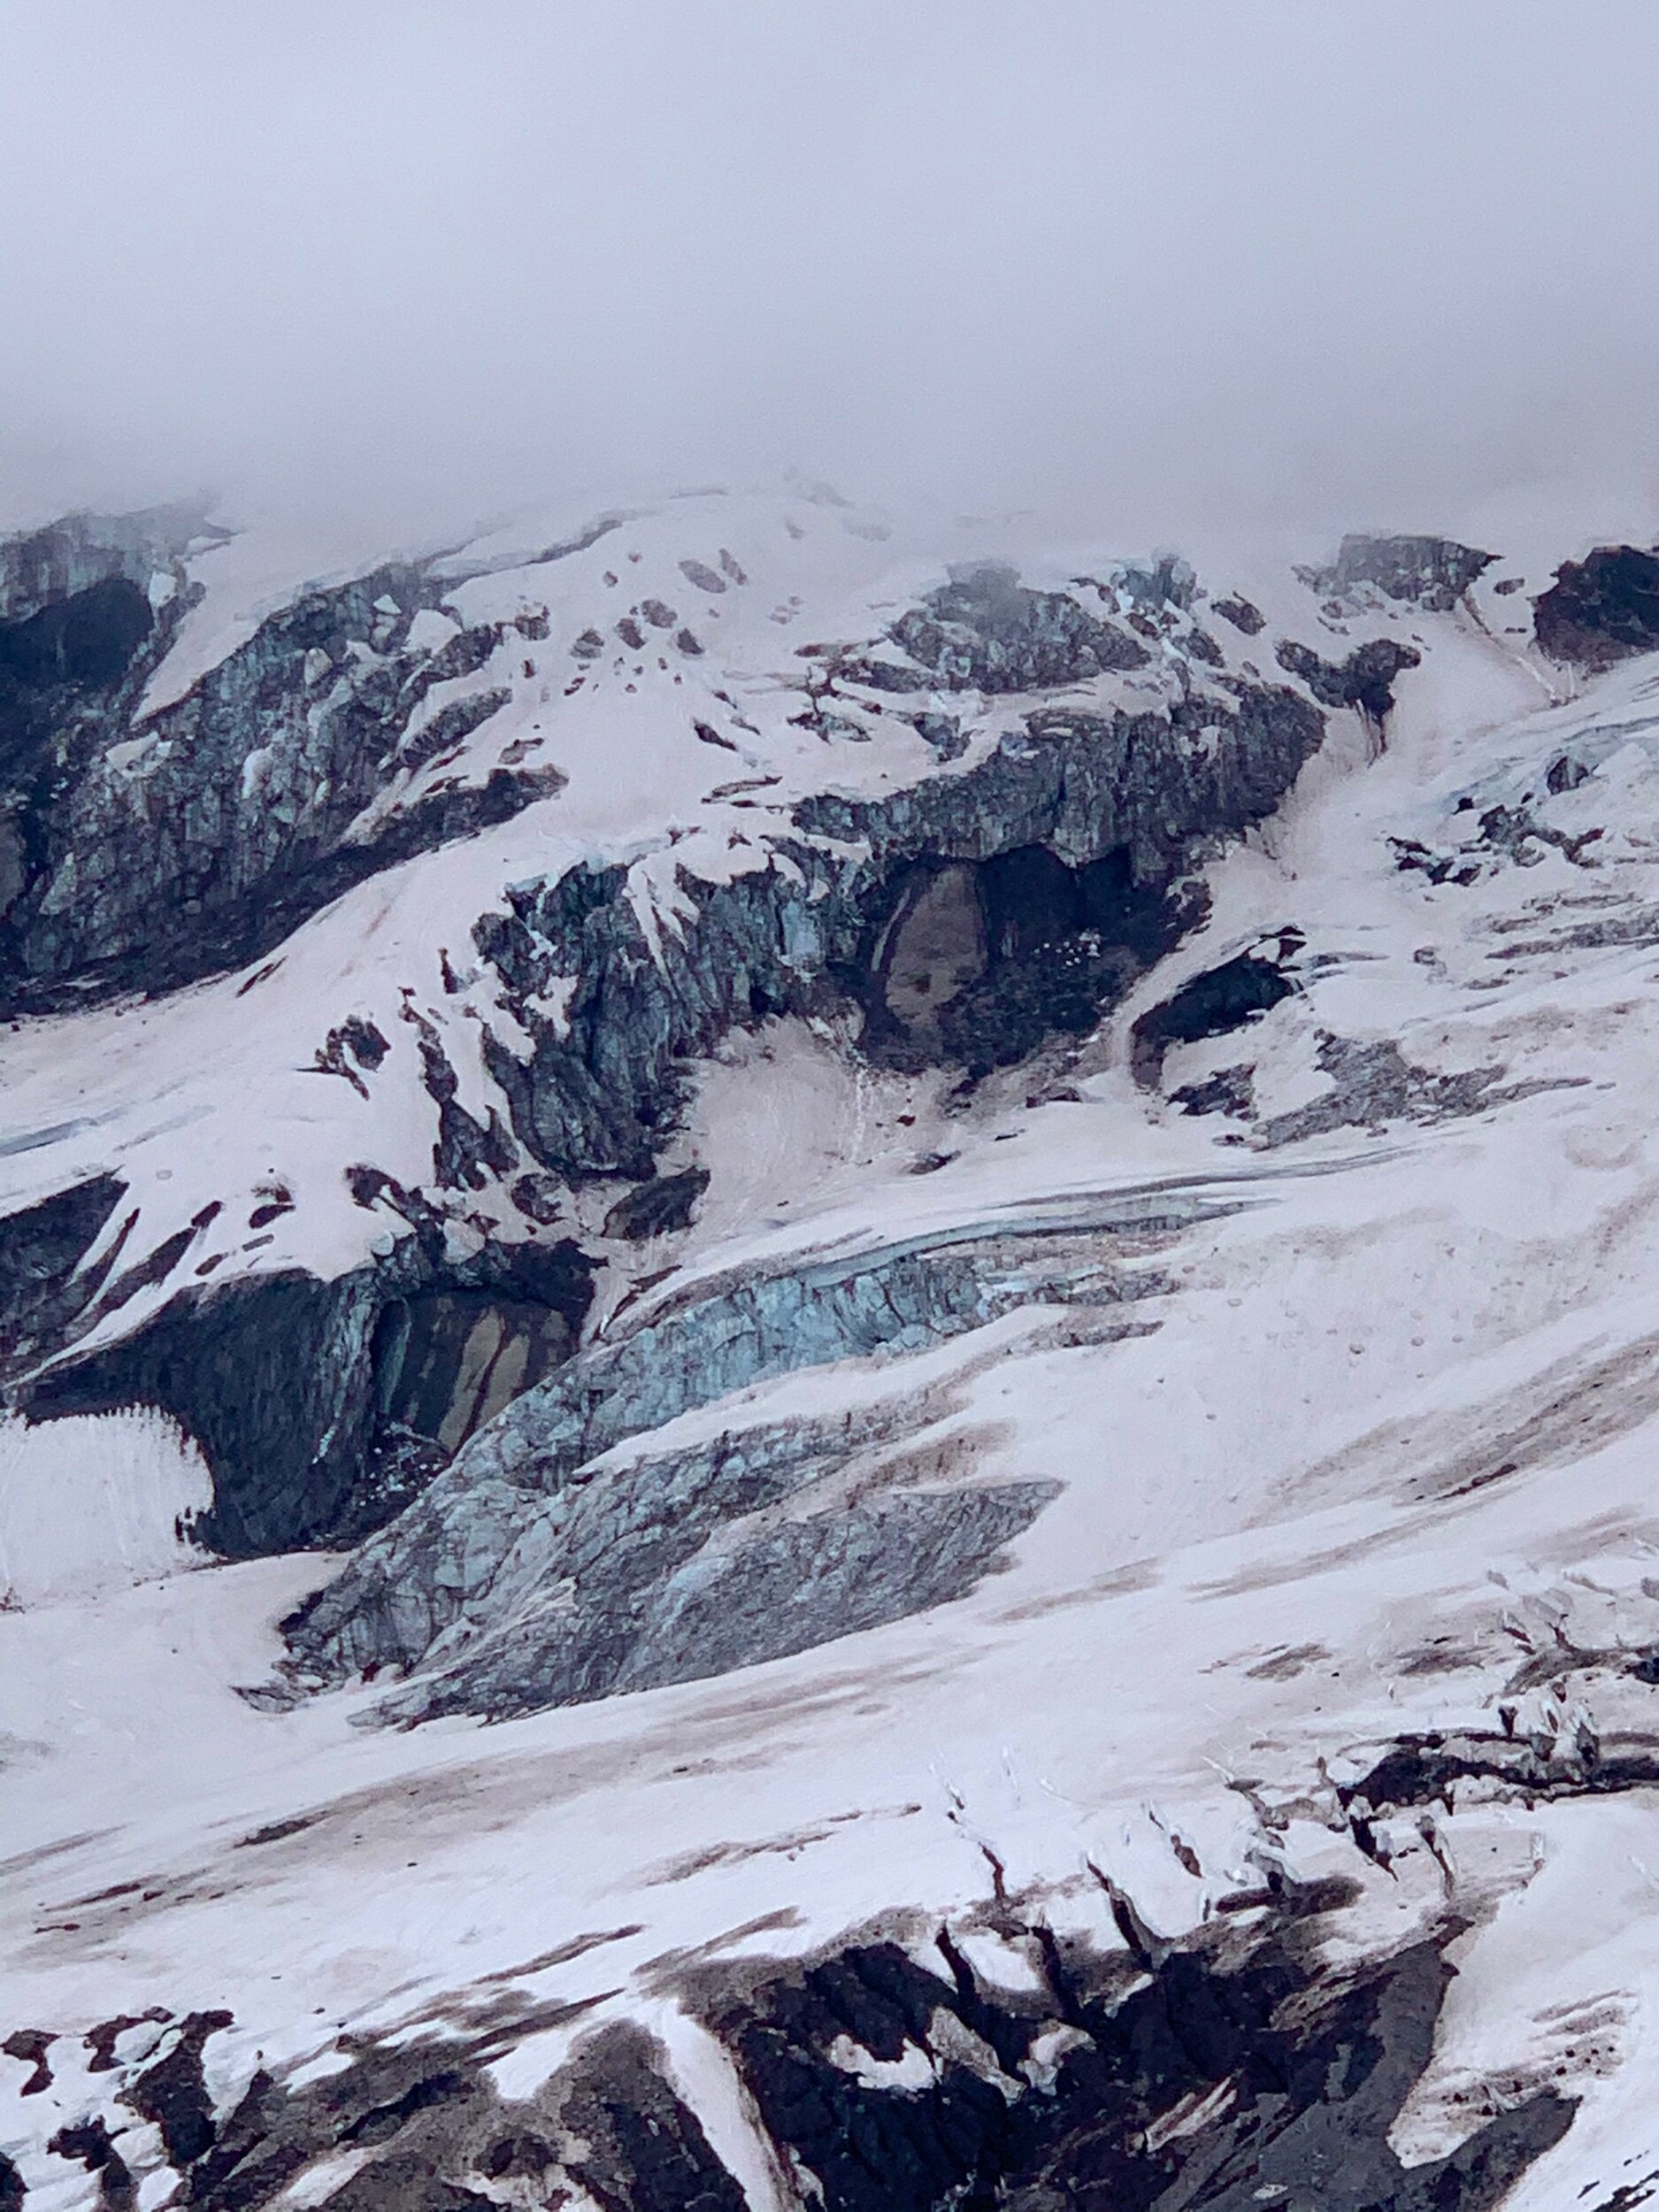  This is one of 25 glaciers on Mt. Rainier. A glacier is a large accumulation of ice, snow, and rock that builds up over years, and even centuries, as the snow accumulates faster than it melts.  